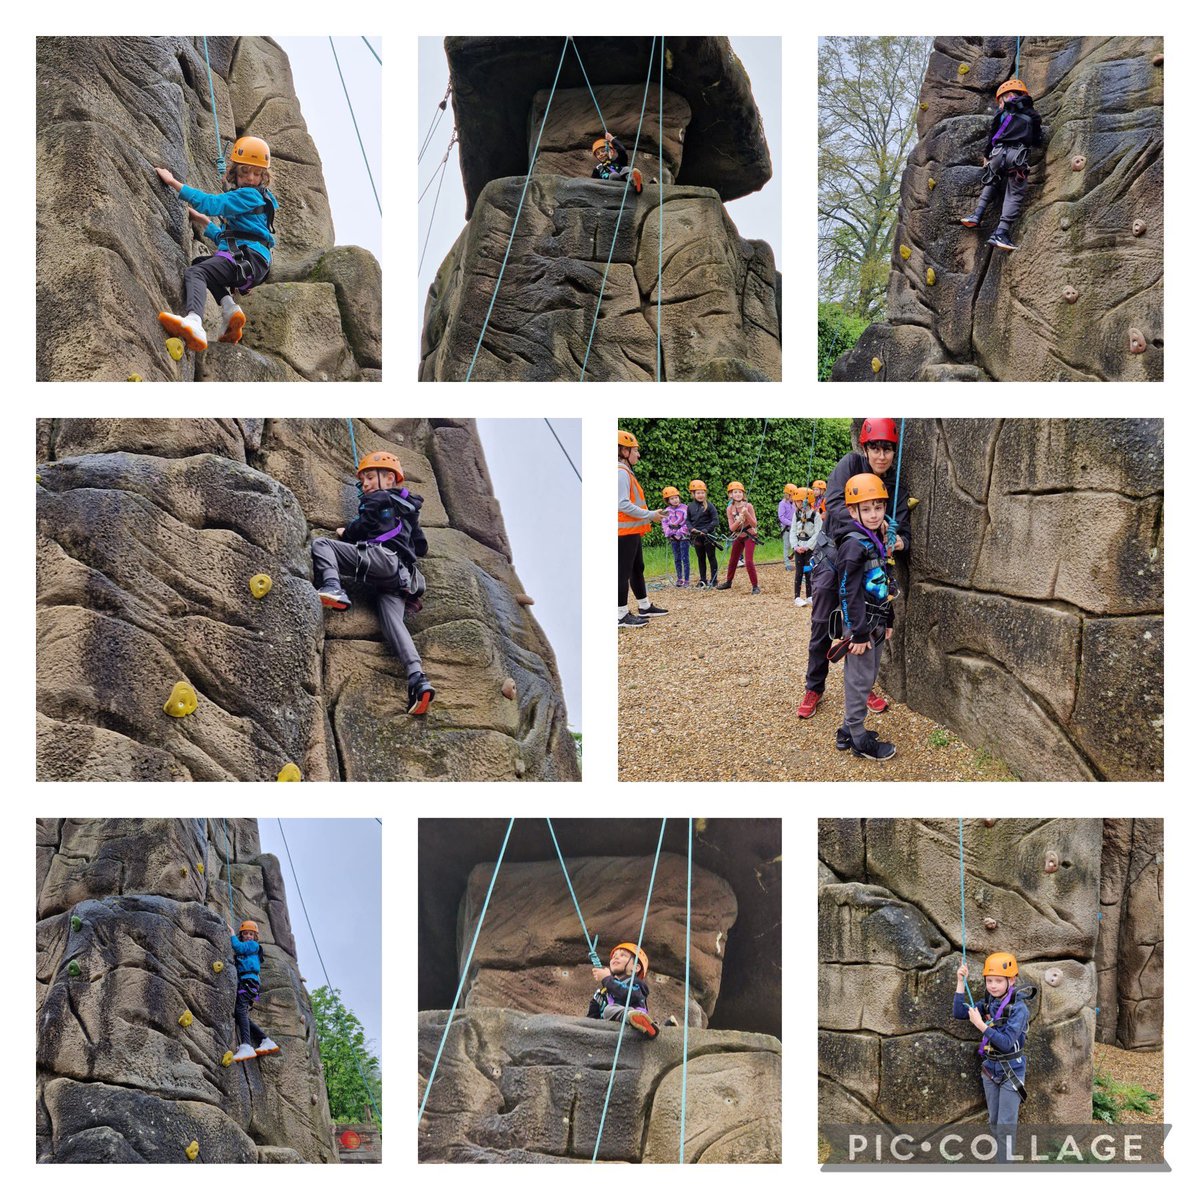 More fun for Y4 @scoutadventures .